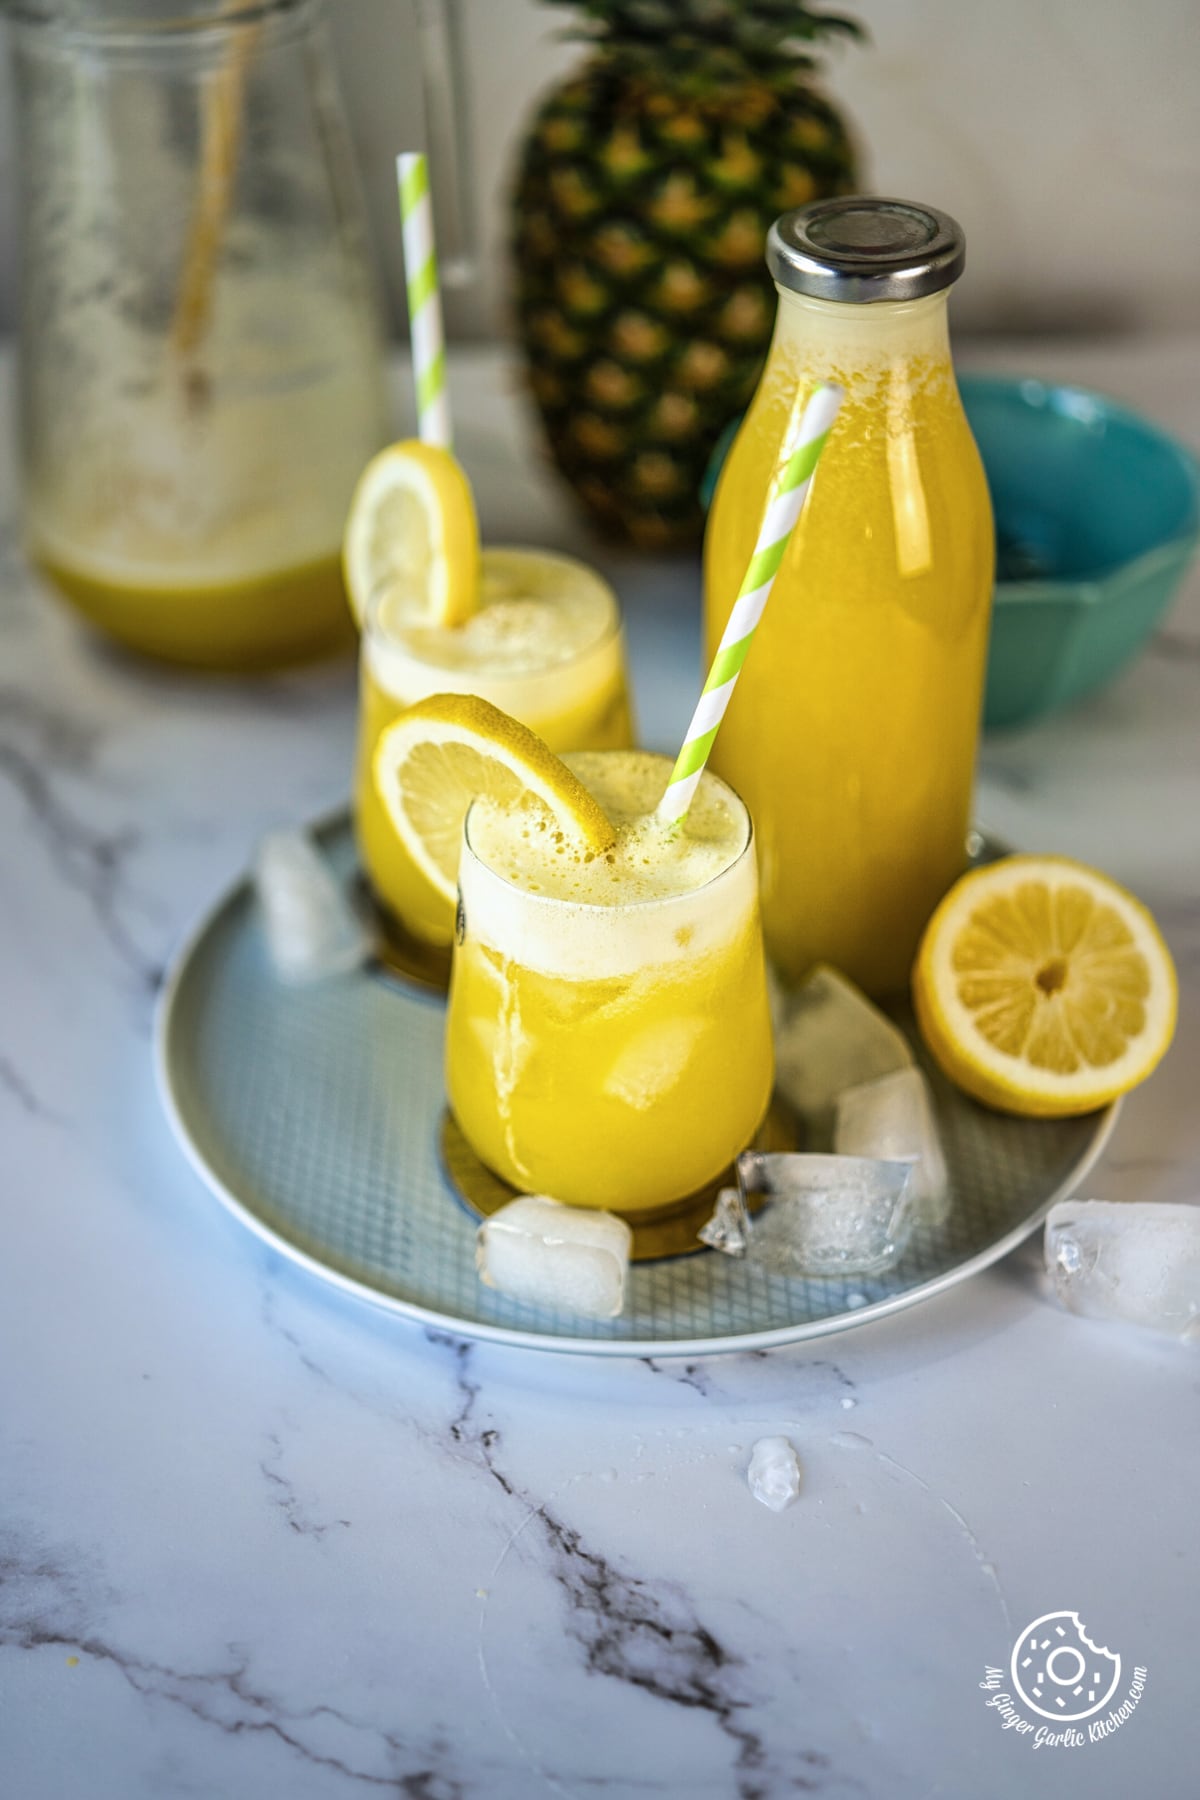 How to Make Homemade Pineapple Juice Recipe and It's Benefits